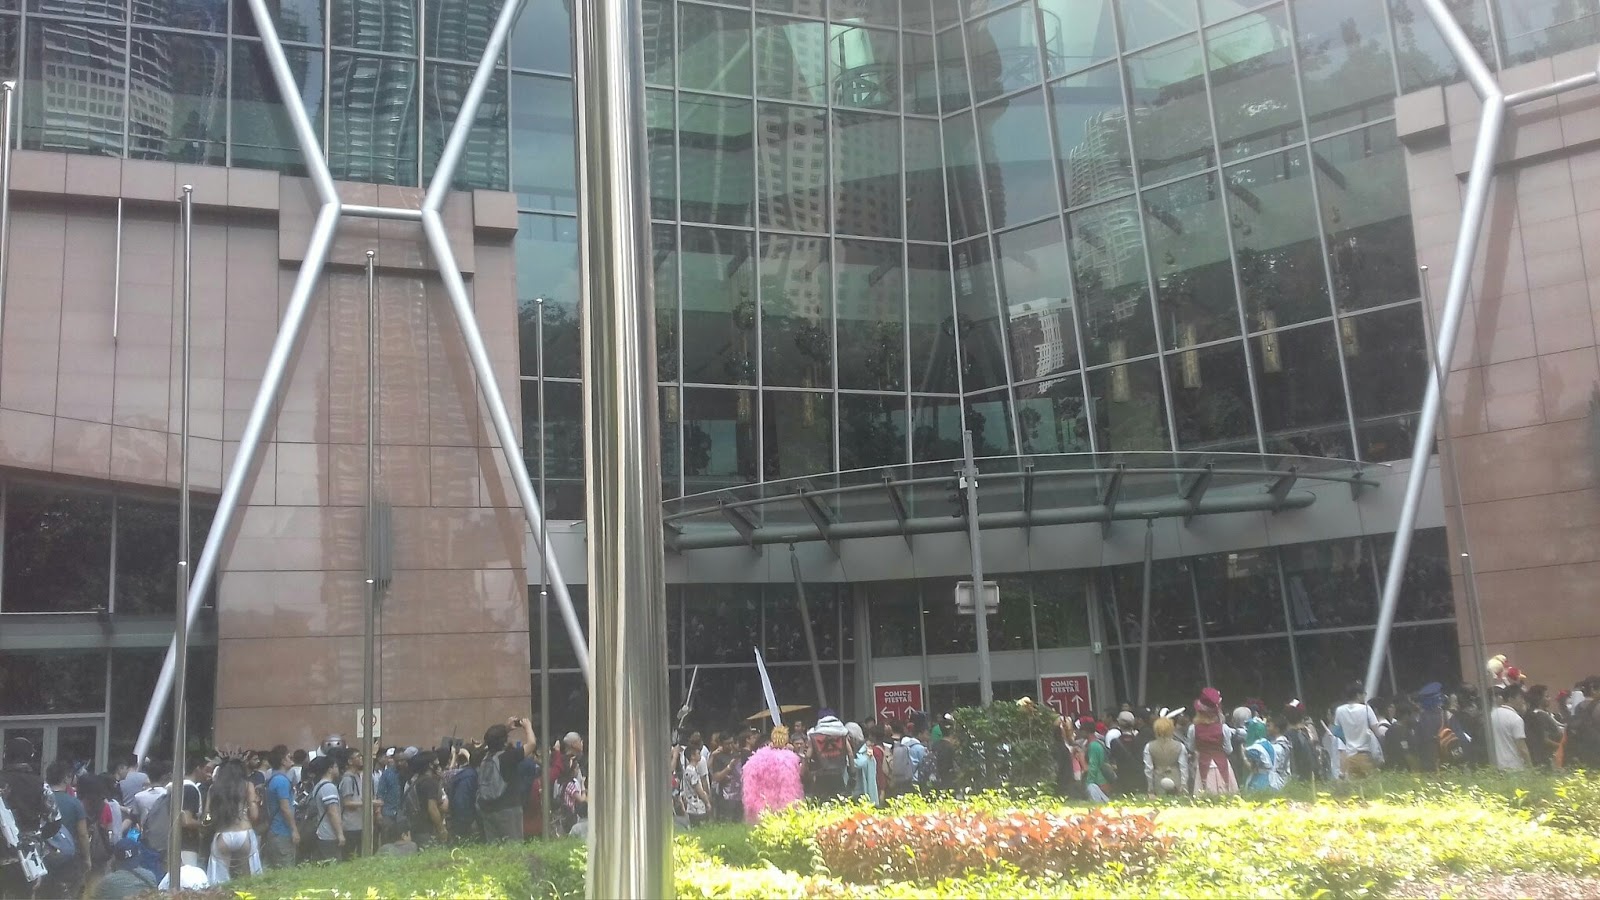 photo showing the outside of the venue